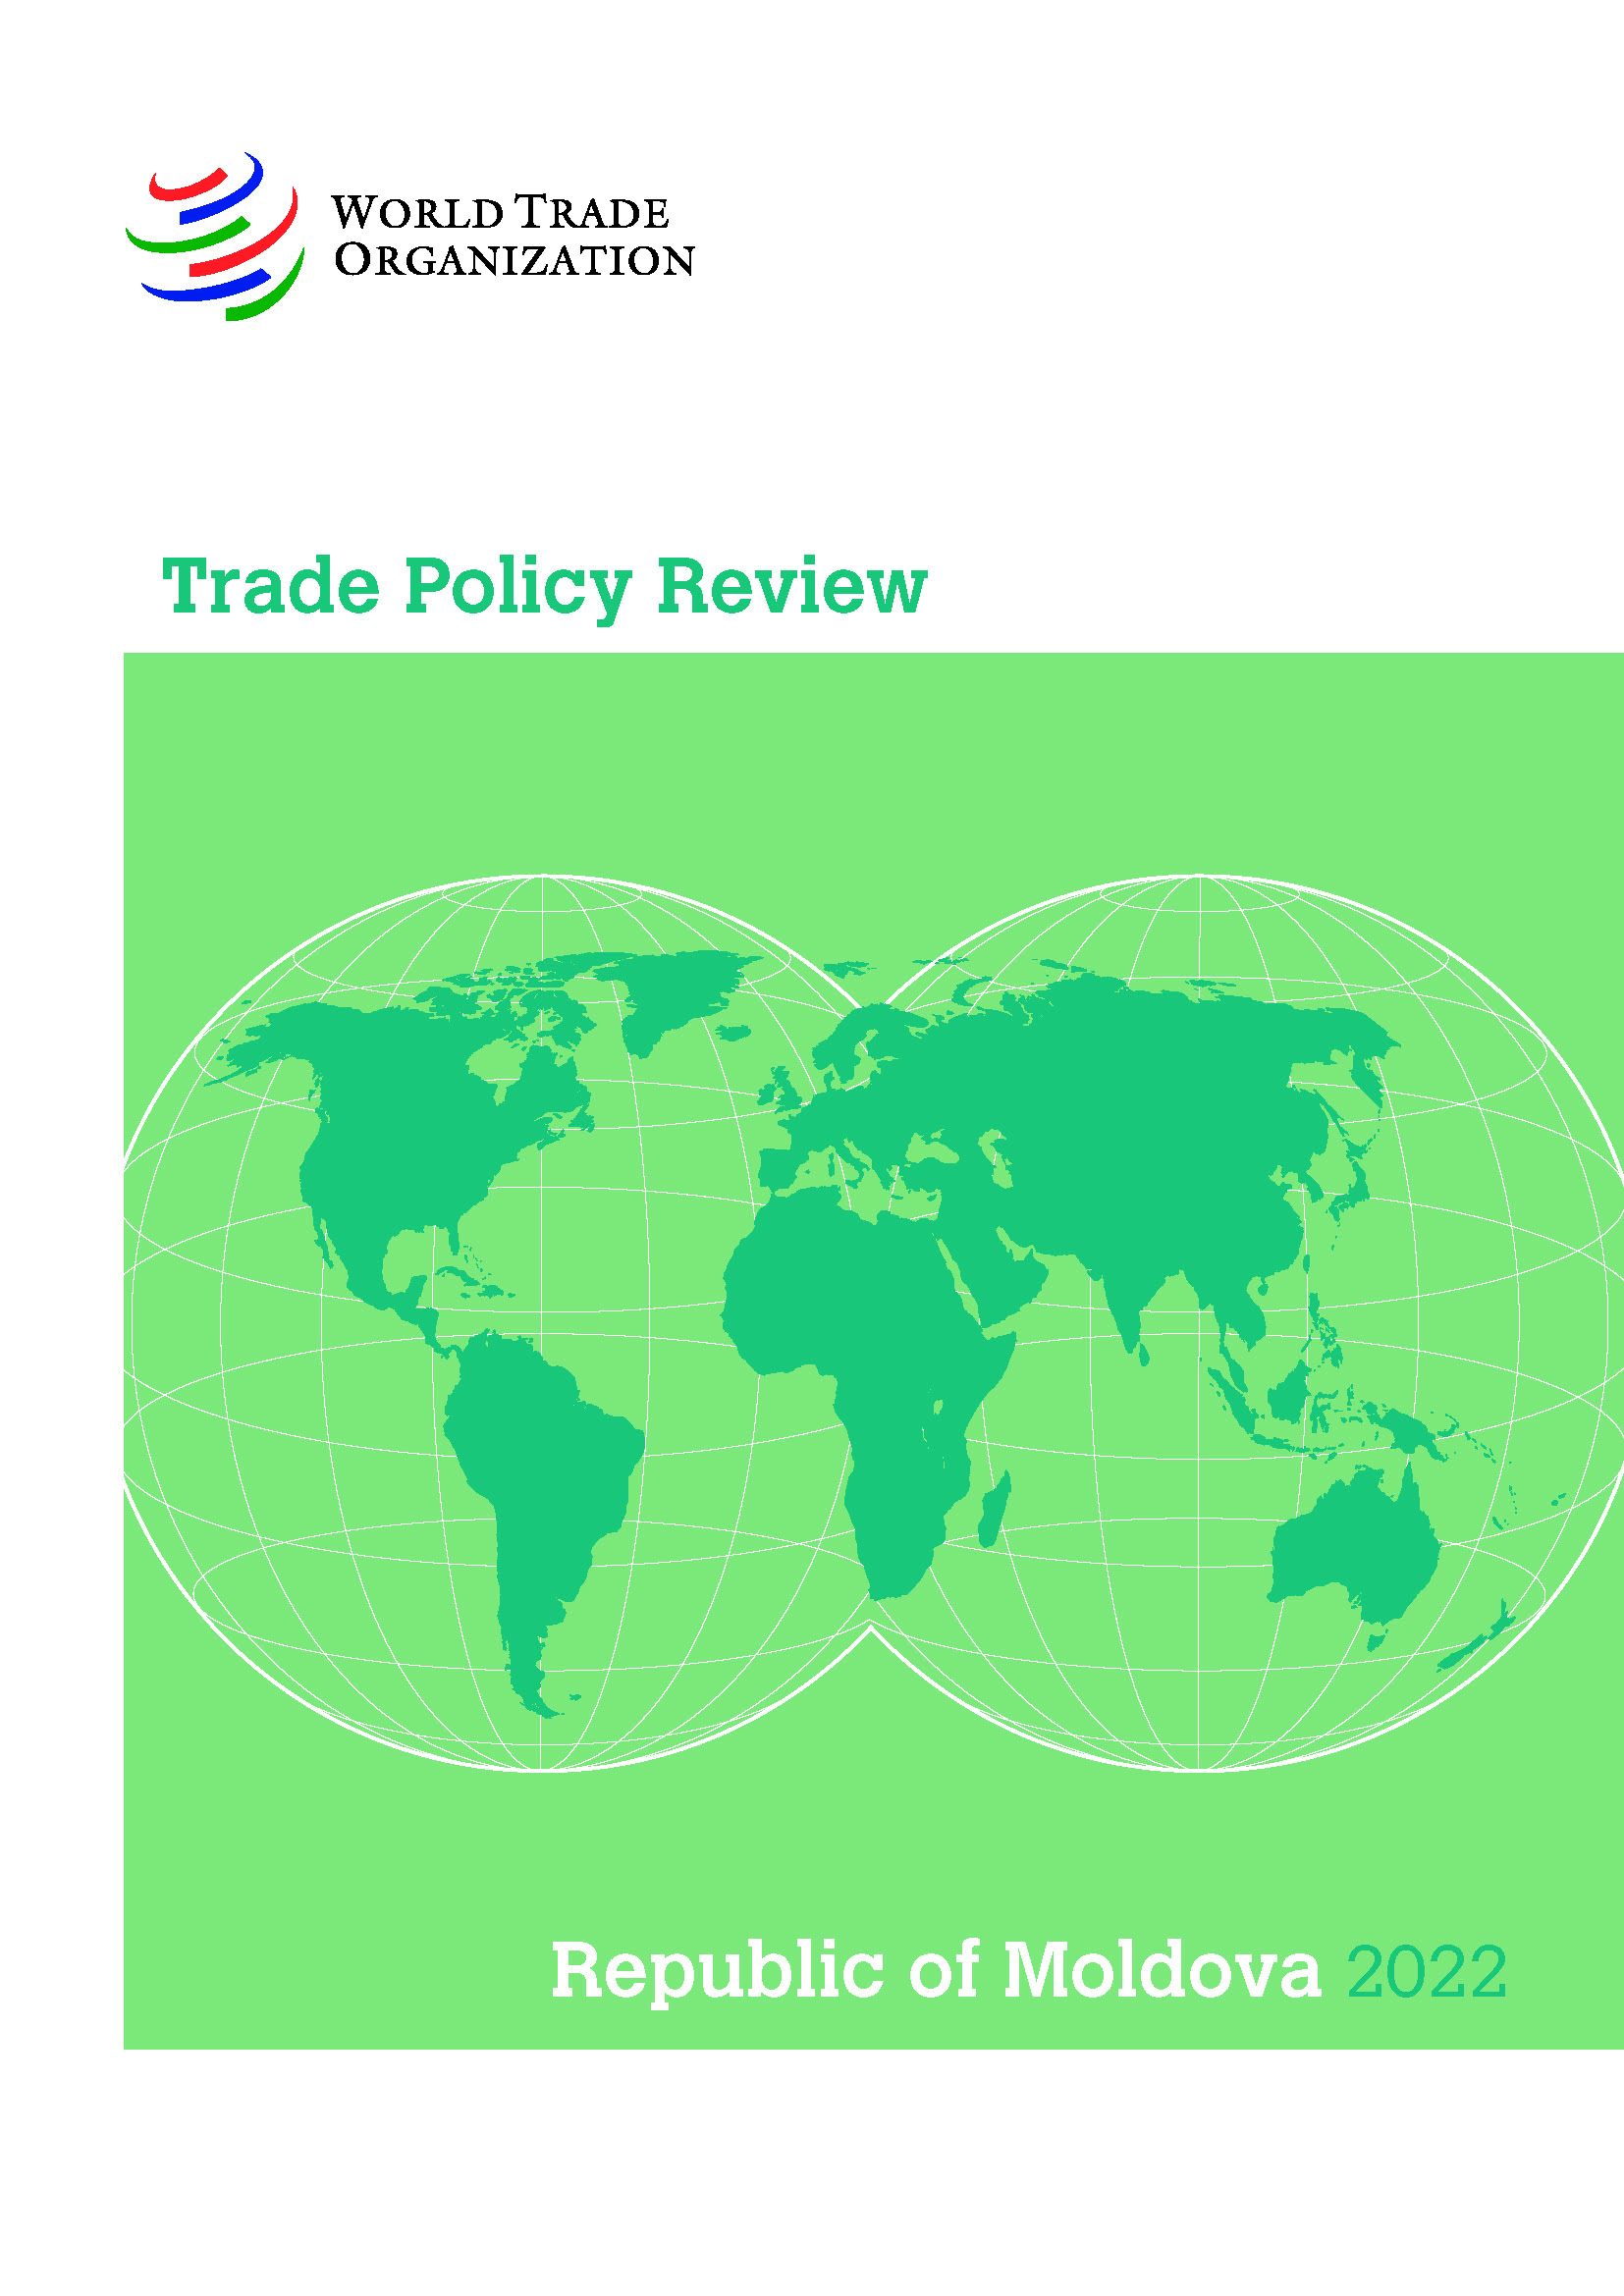 image of Concluding Remarks by the Chairperson of the Trade Policy Review Body, H.E. Mr. Ángel Villalobos Rodríguez of Mexico, at the Trade Policy Review of the Republic of Moldova, 20 and 22 July 2022.